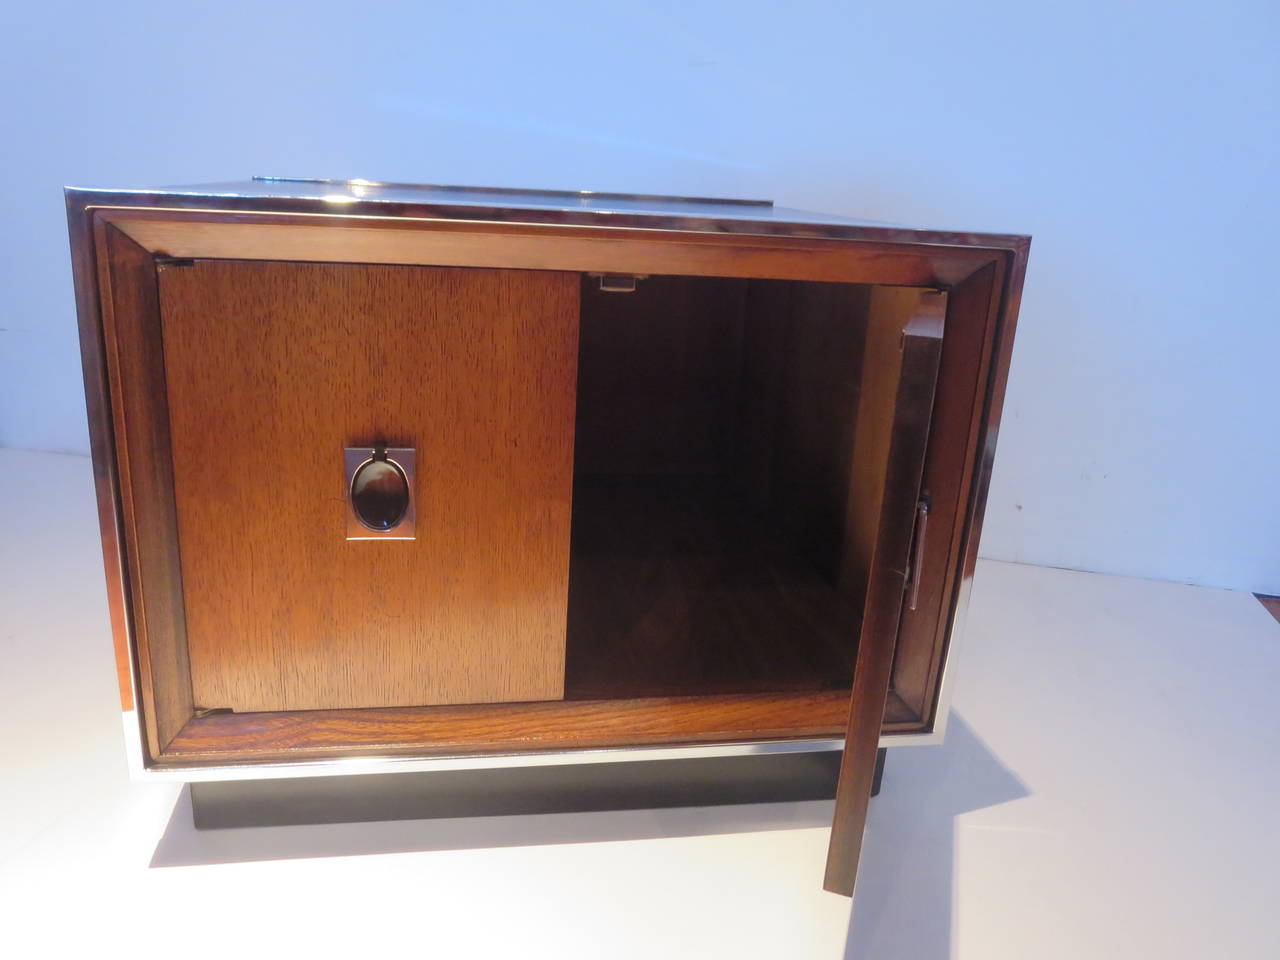 20th Century American Modern Cocktail or End Table or Cabinet in Walnut and Chrome